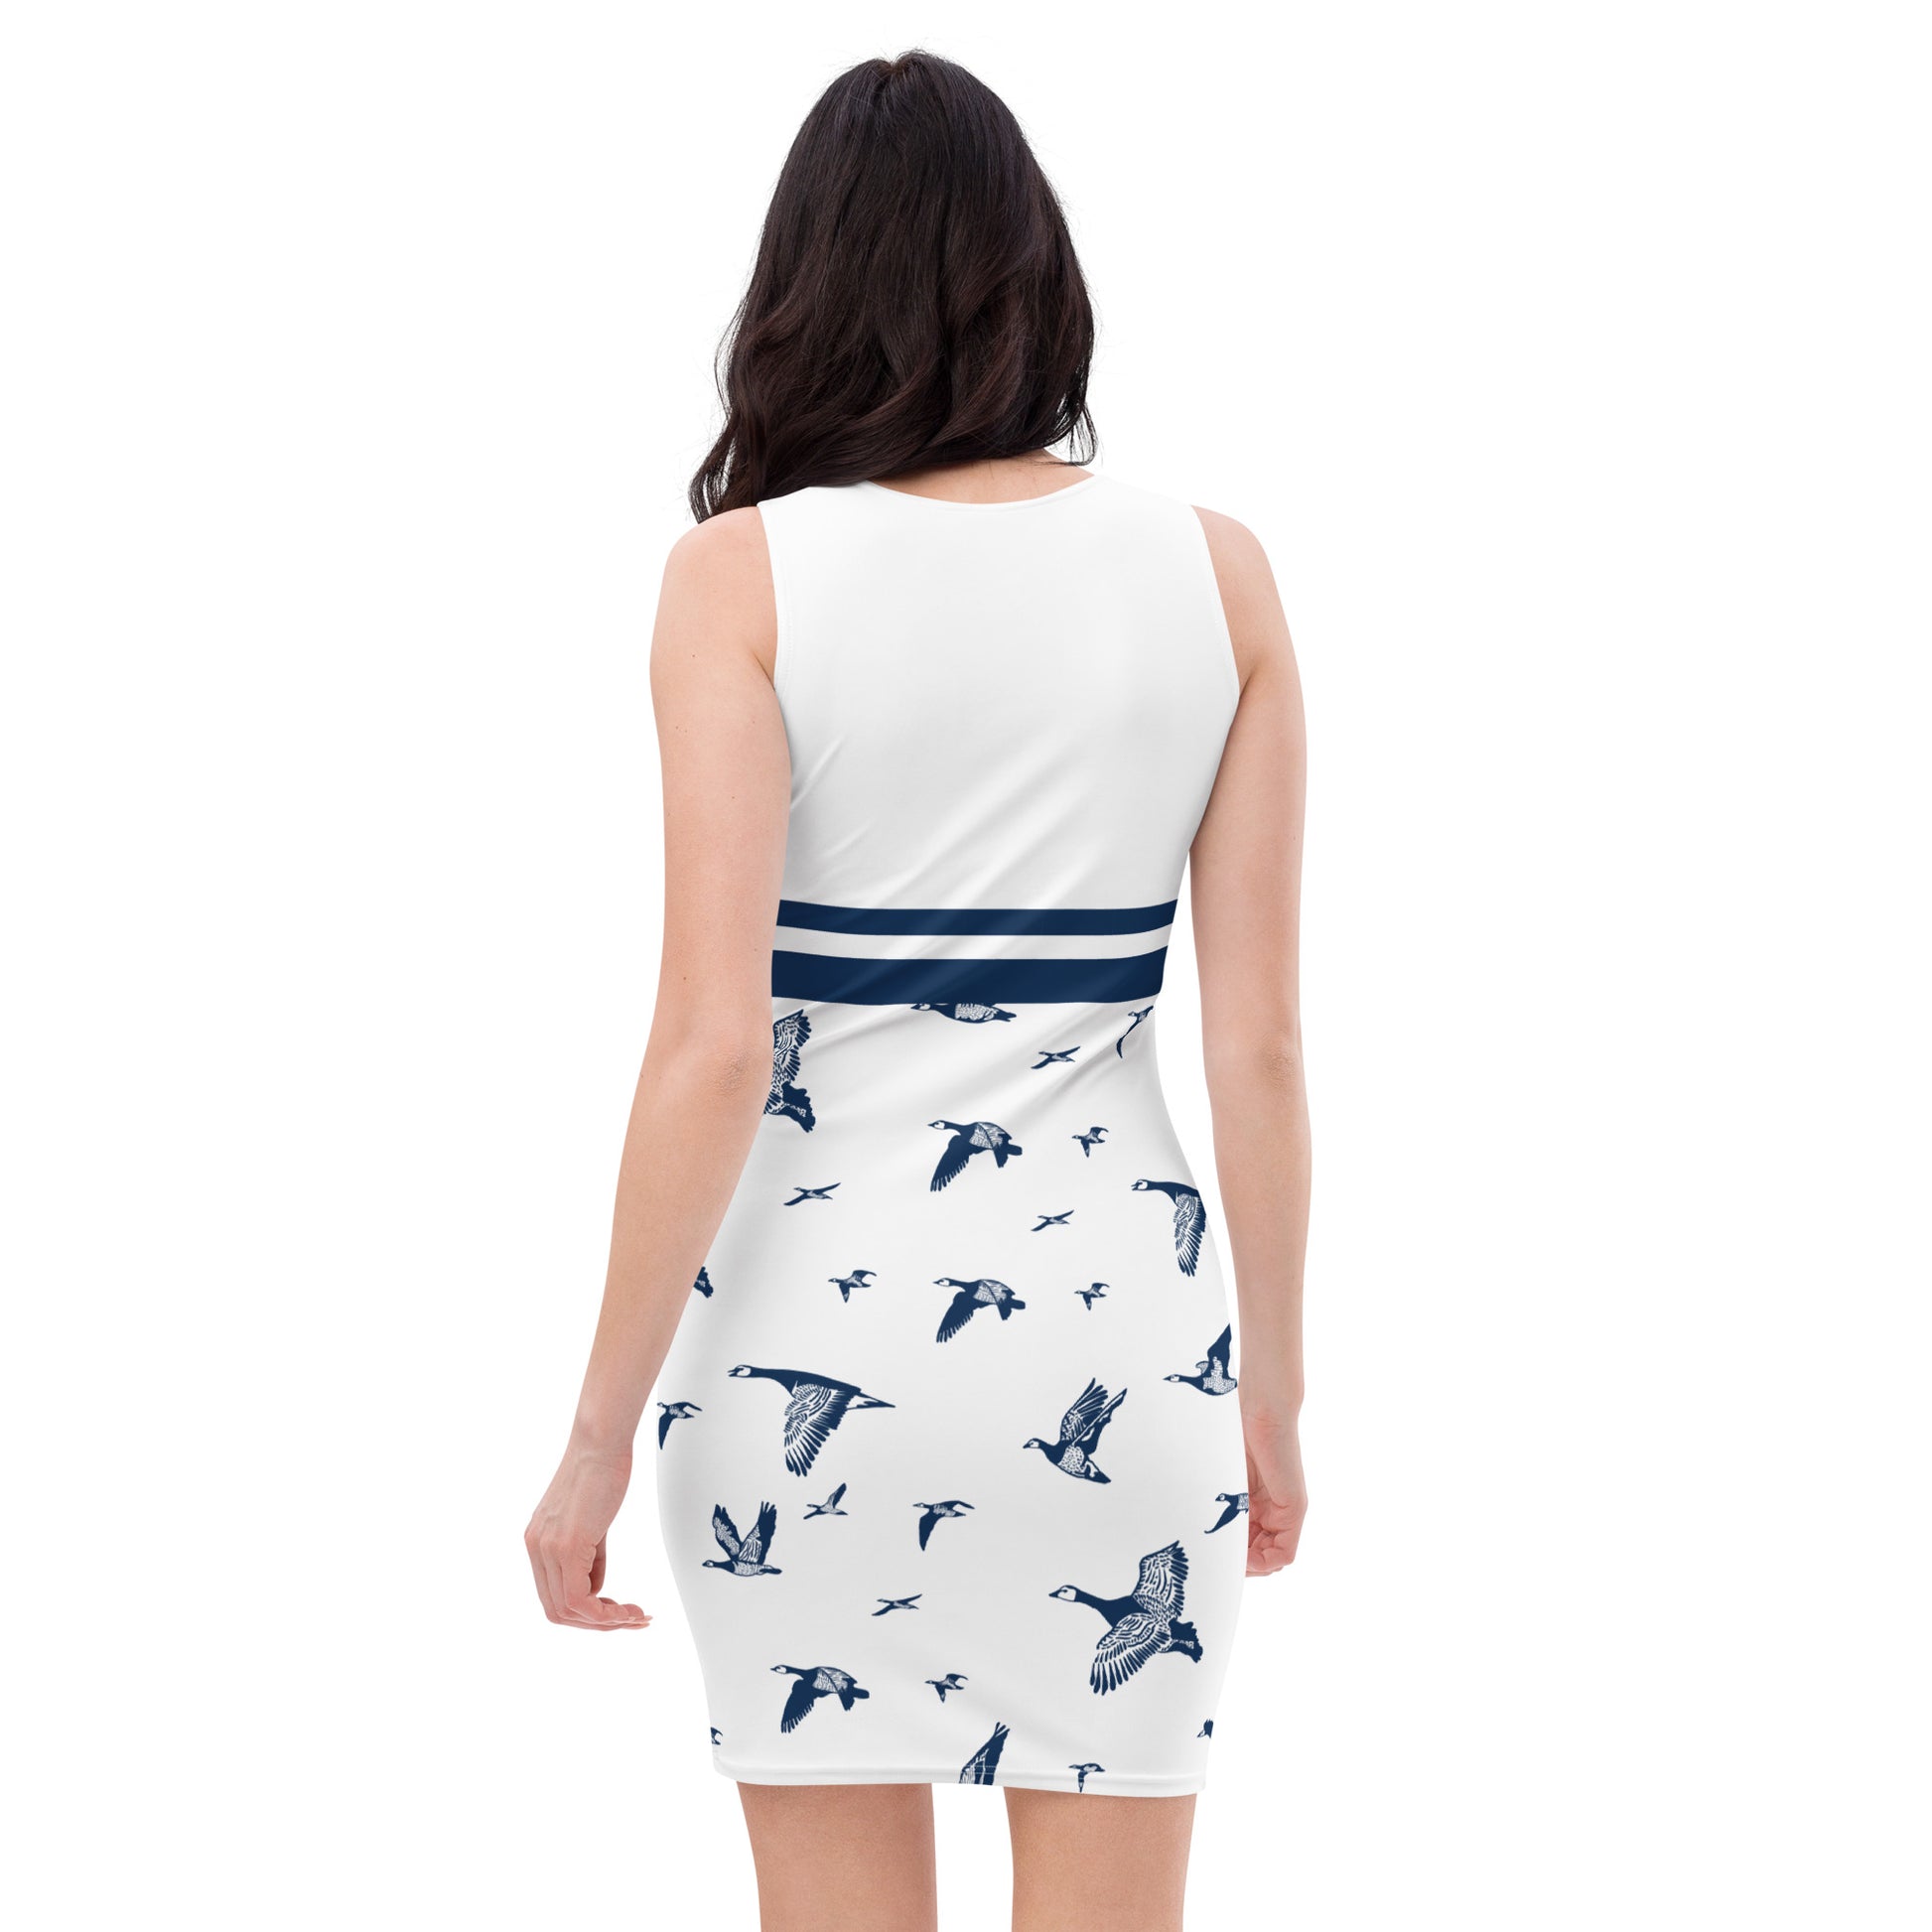 Oh my geese - Sublimation Cut & Sew Dress - Dresses- Print N Stuff - [designed in Turku FInland]